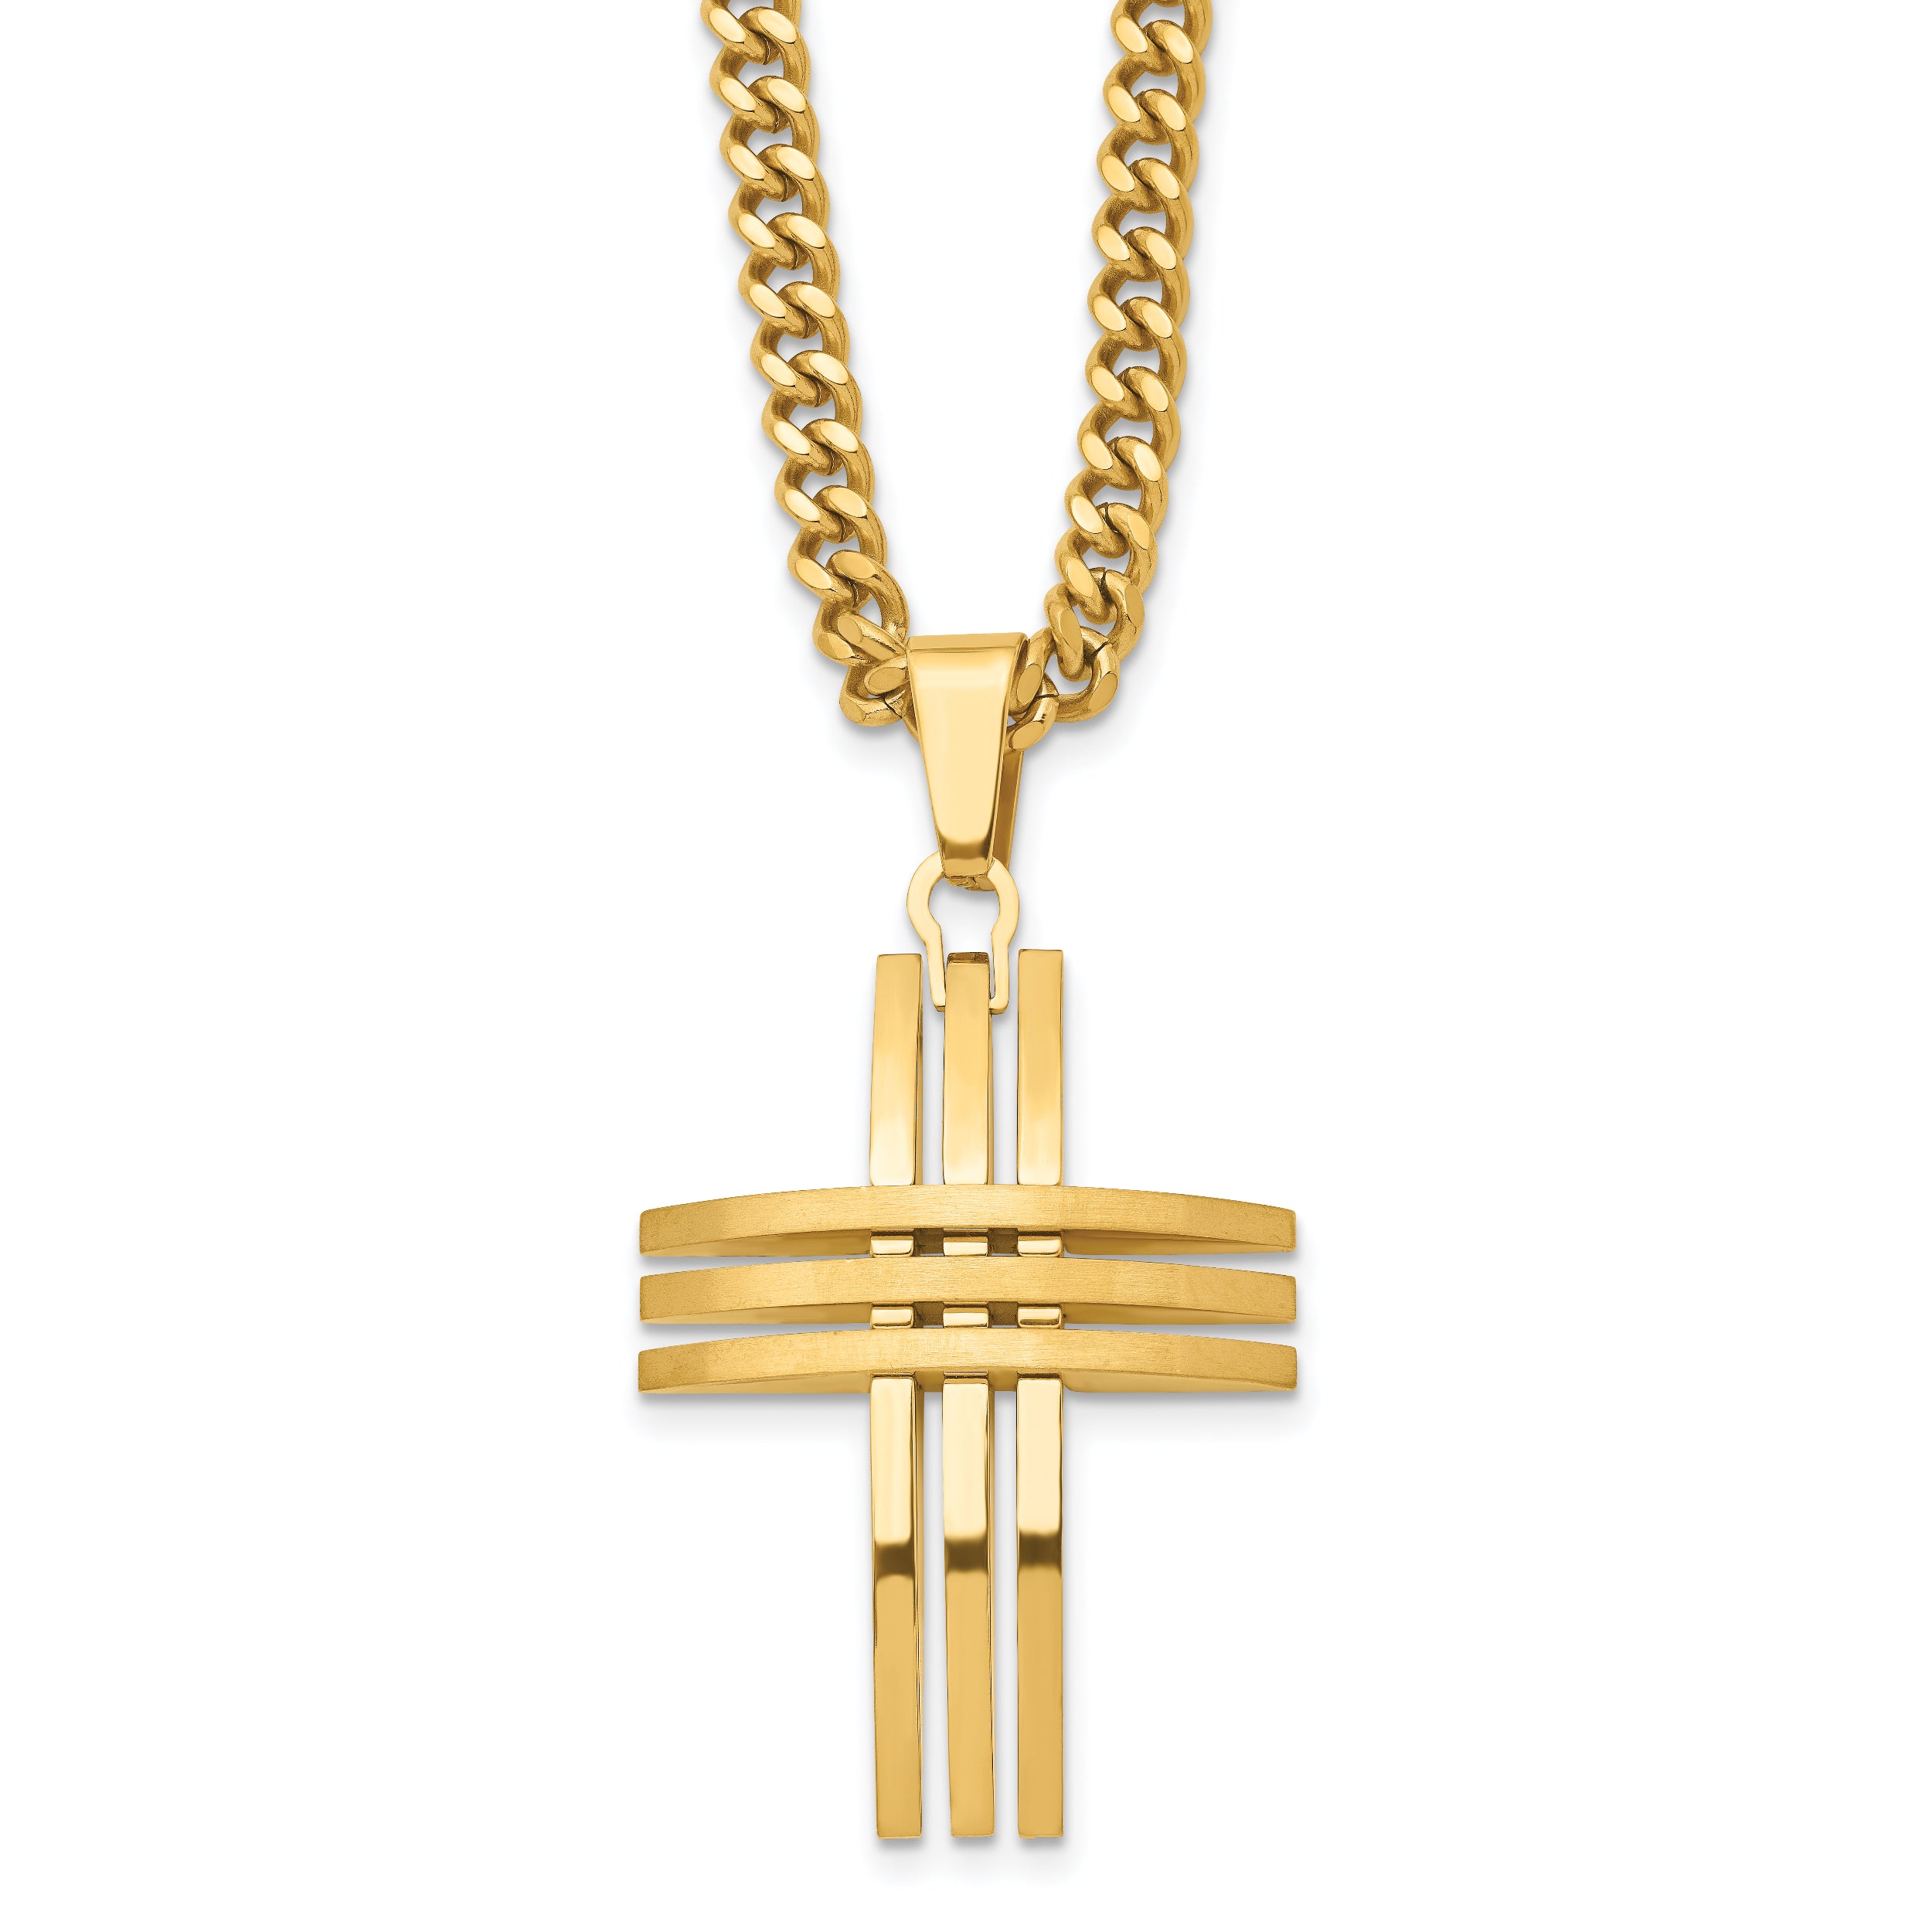 Chisel Stainless Steel Brushed and Polished Yellow IP-plated Cross Pendant on a 24 inch Curb Chain Necklace